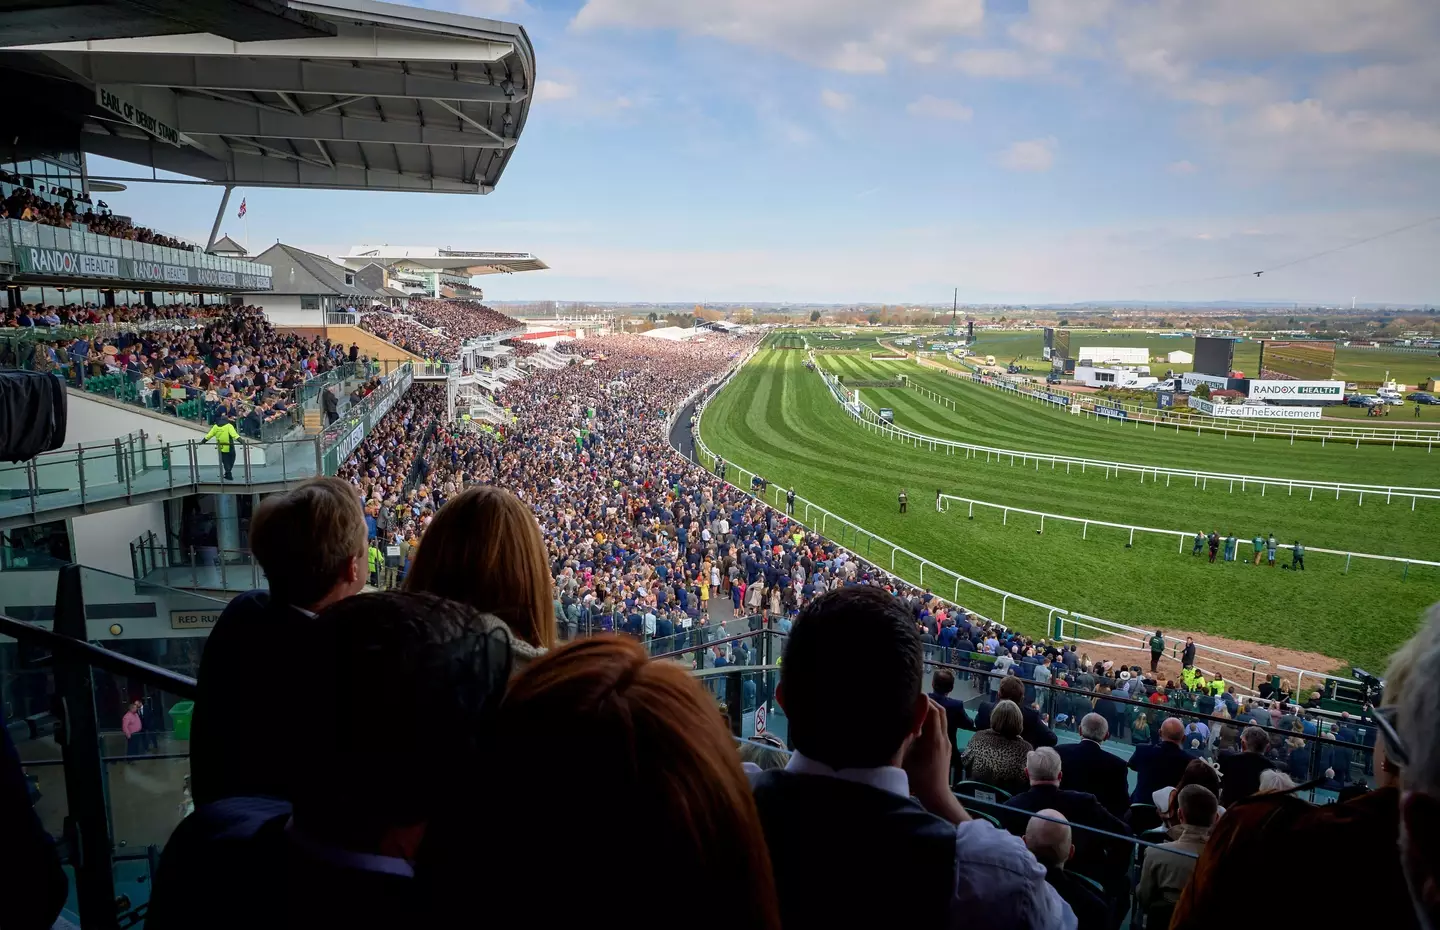 The Grand National runs over three days and is one of the biggest racing events in the calendar.